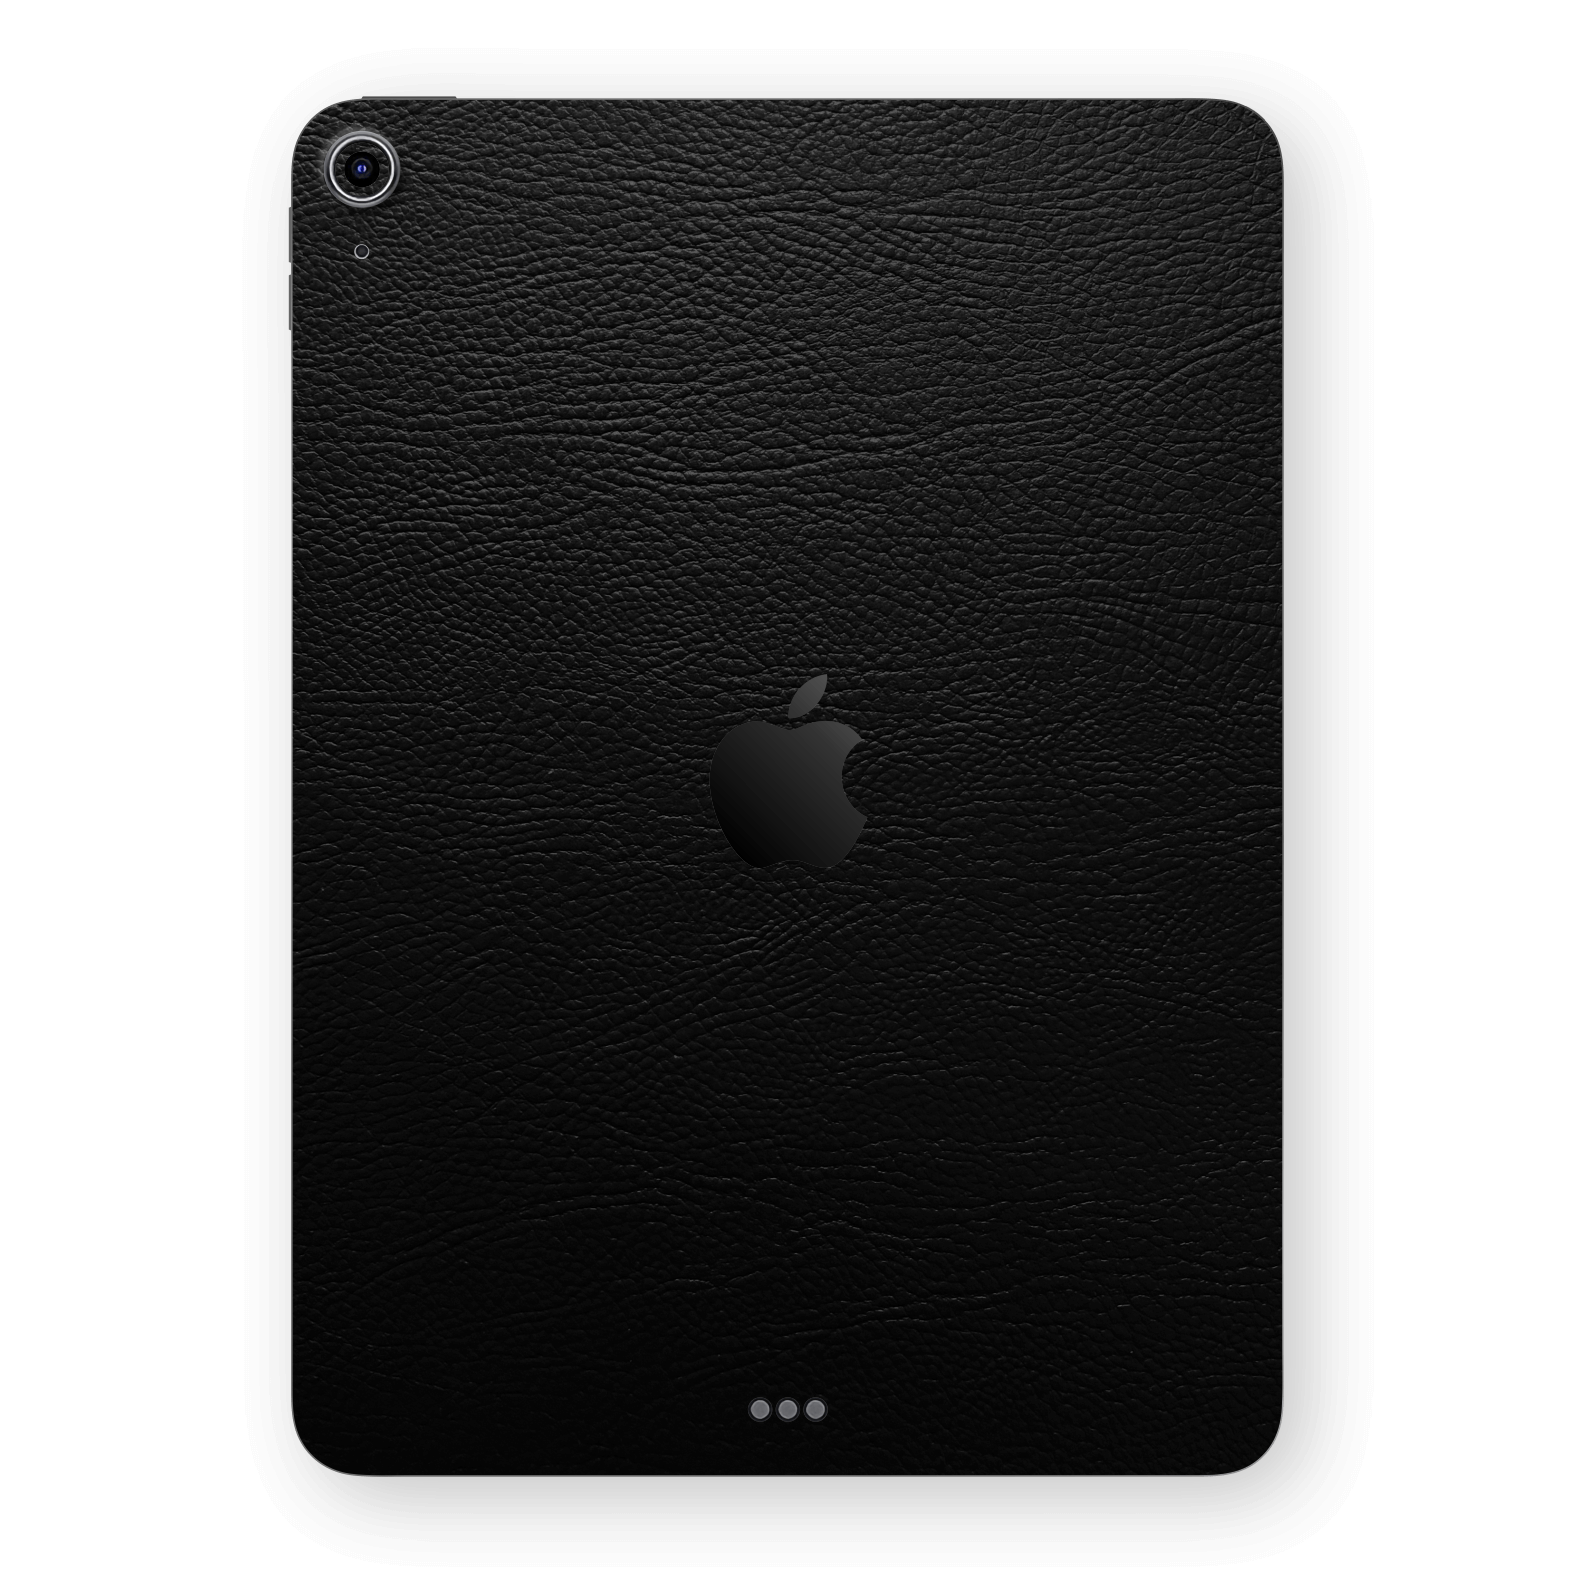 iPad Air 11” (M2) Luxuria BLACK LEATHER Riders Skin Wrap Sticker Decal Cover Protector by QSKINZ | qskinz.com